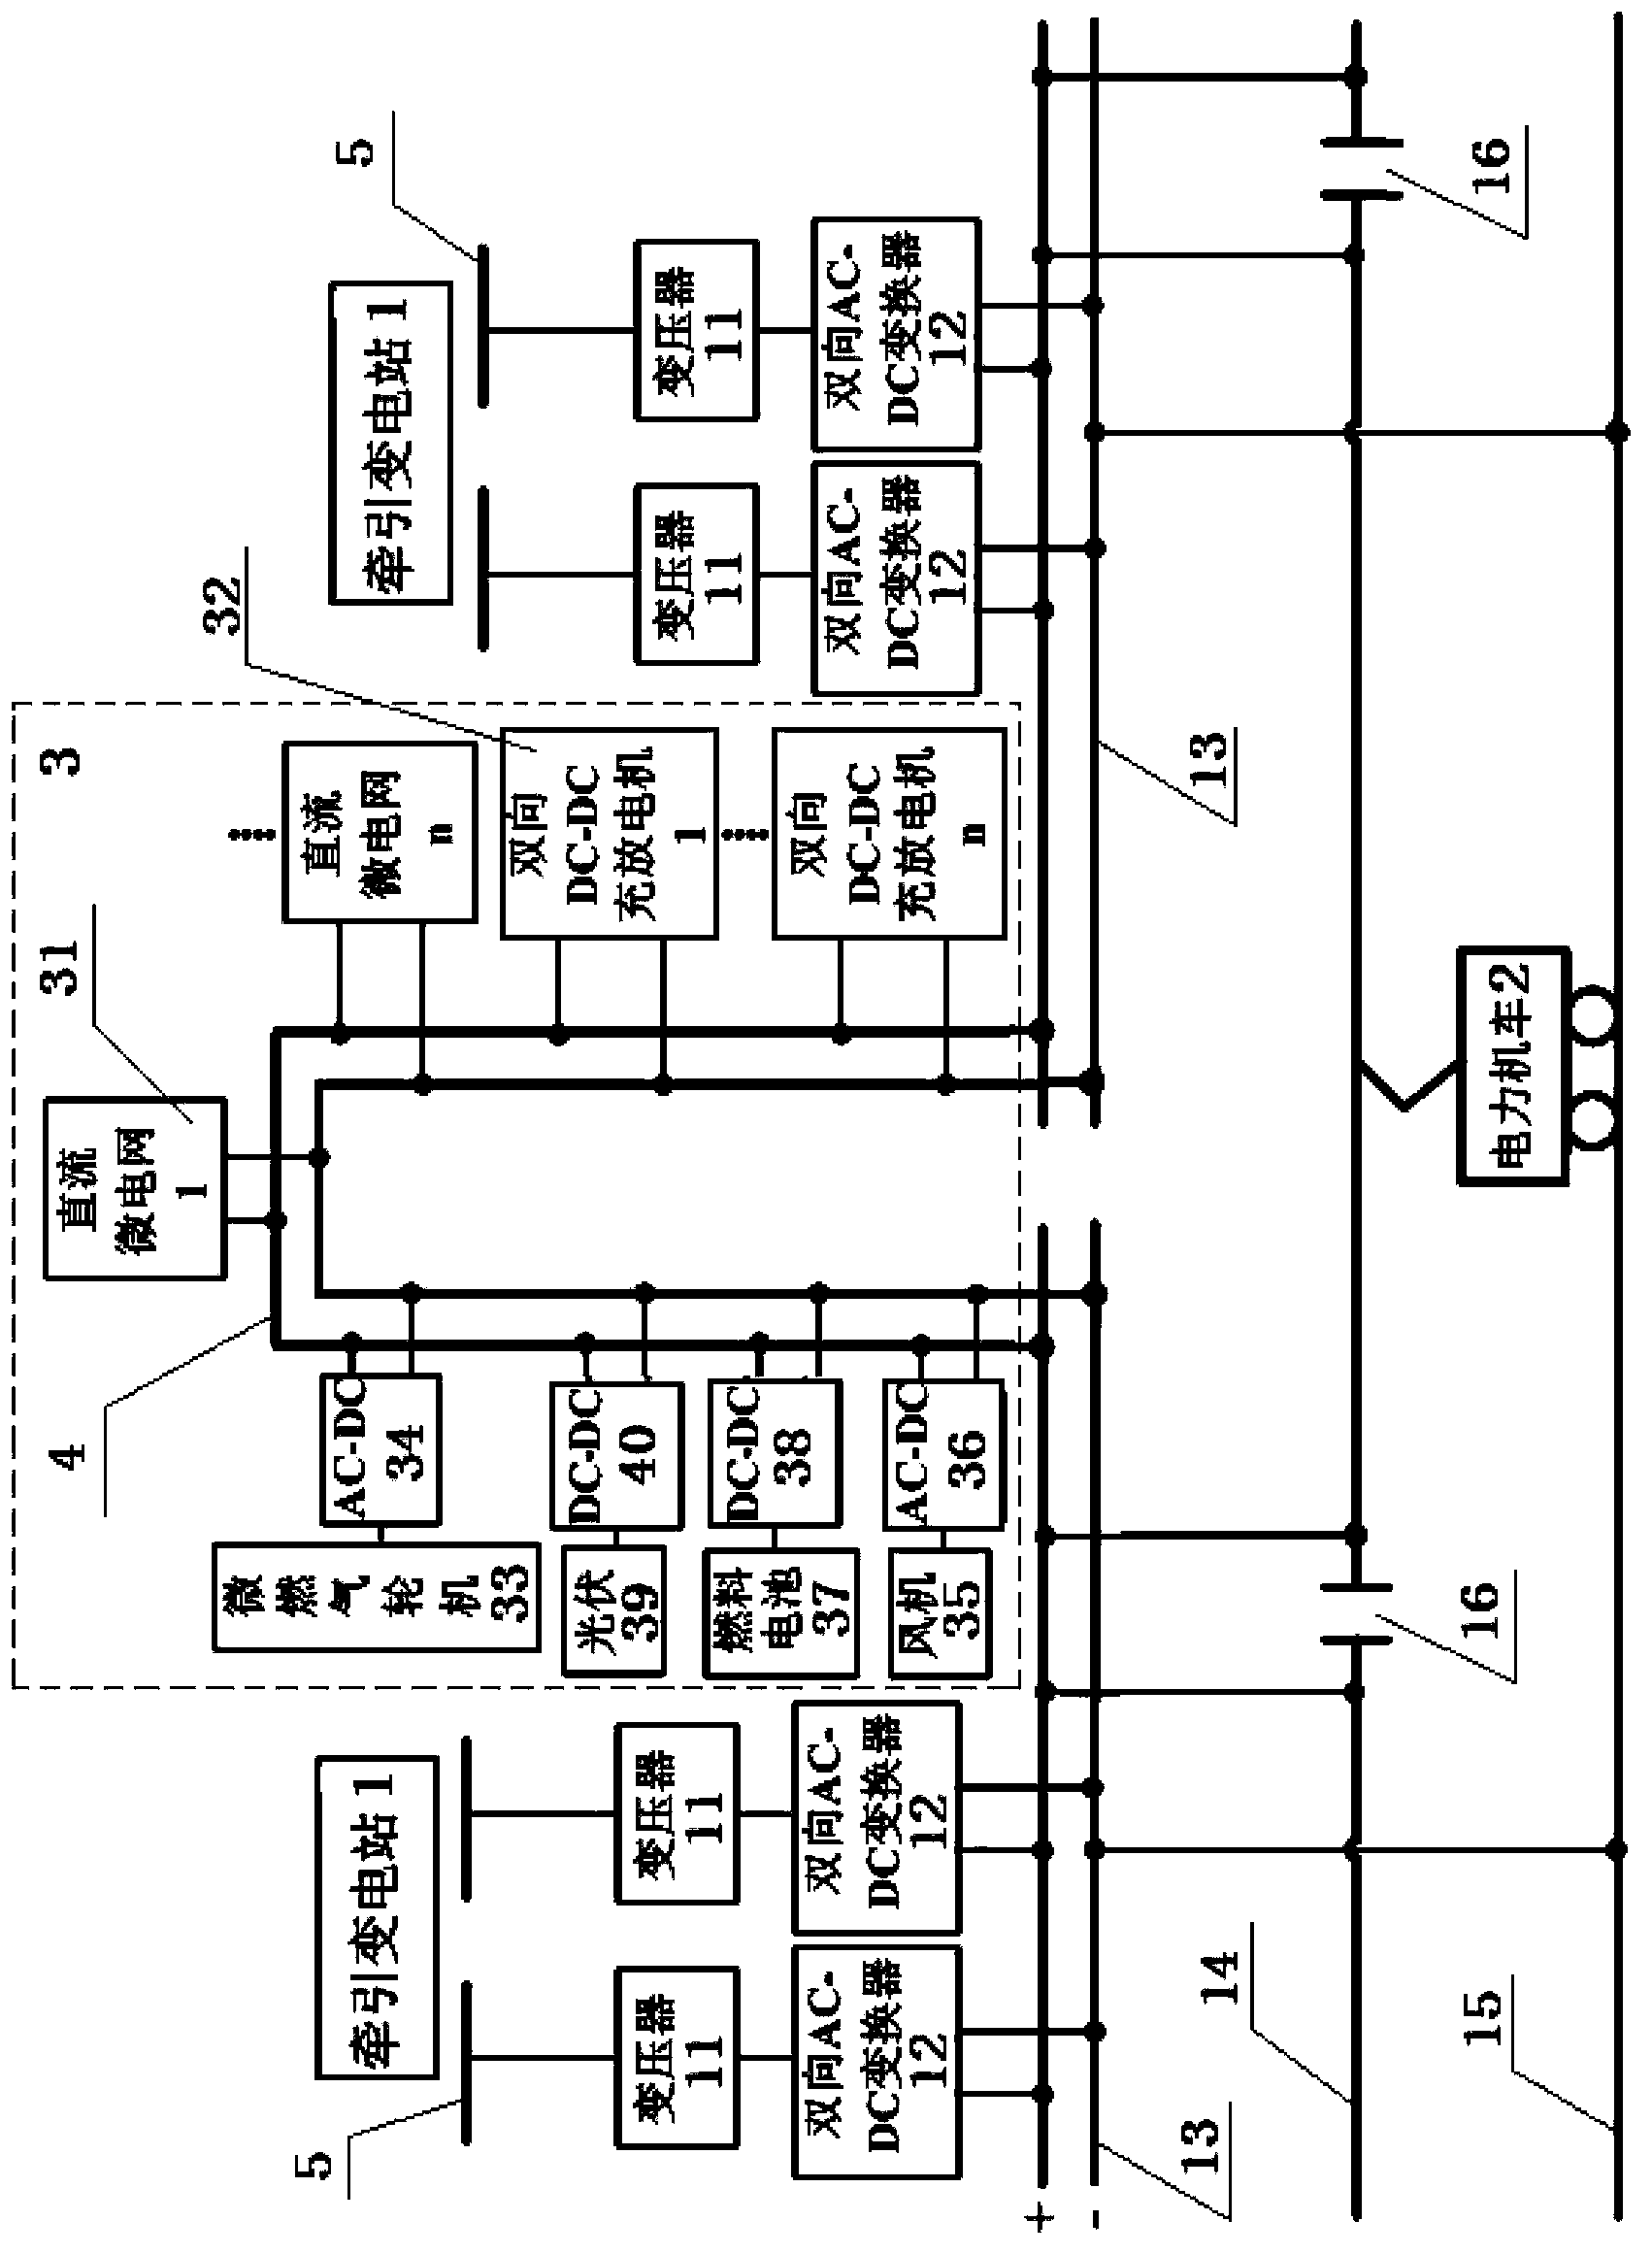 Bidirectional interactive type DC (direct-current) traction power supply system base on new energy